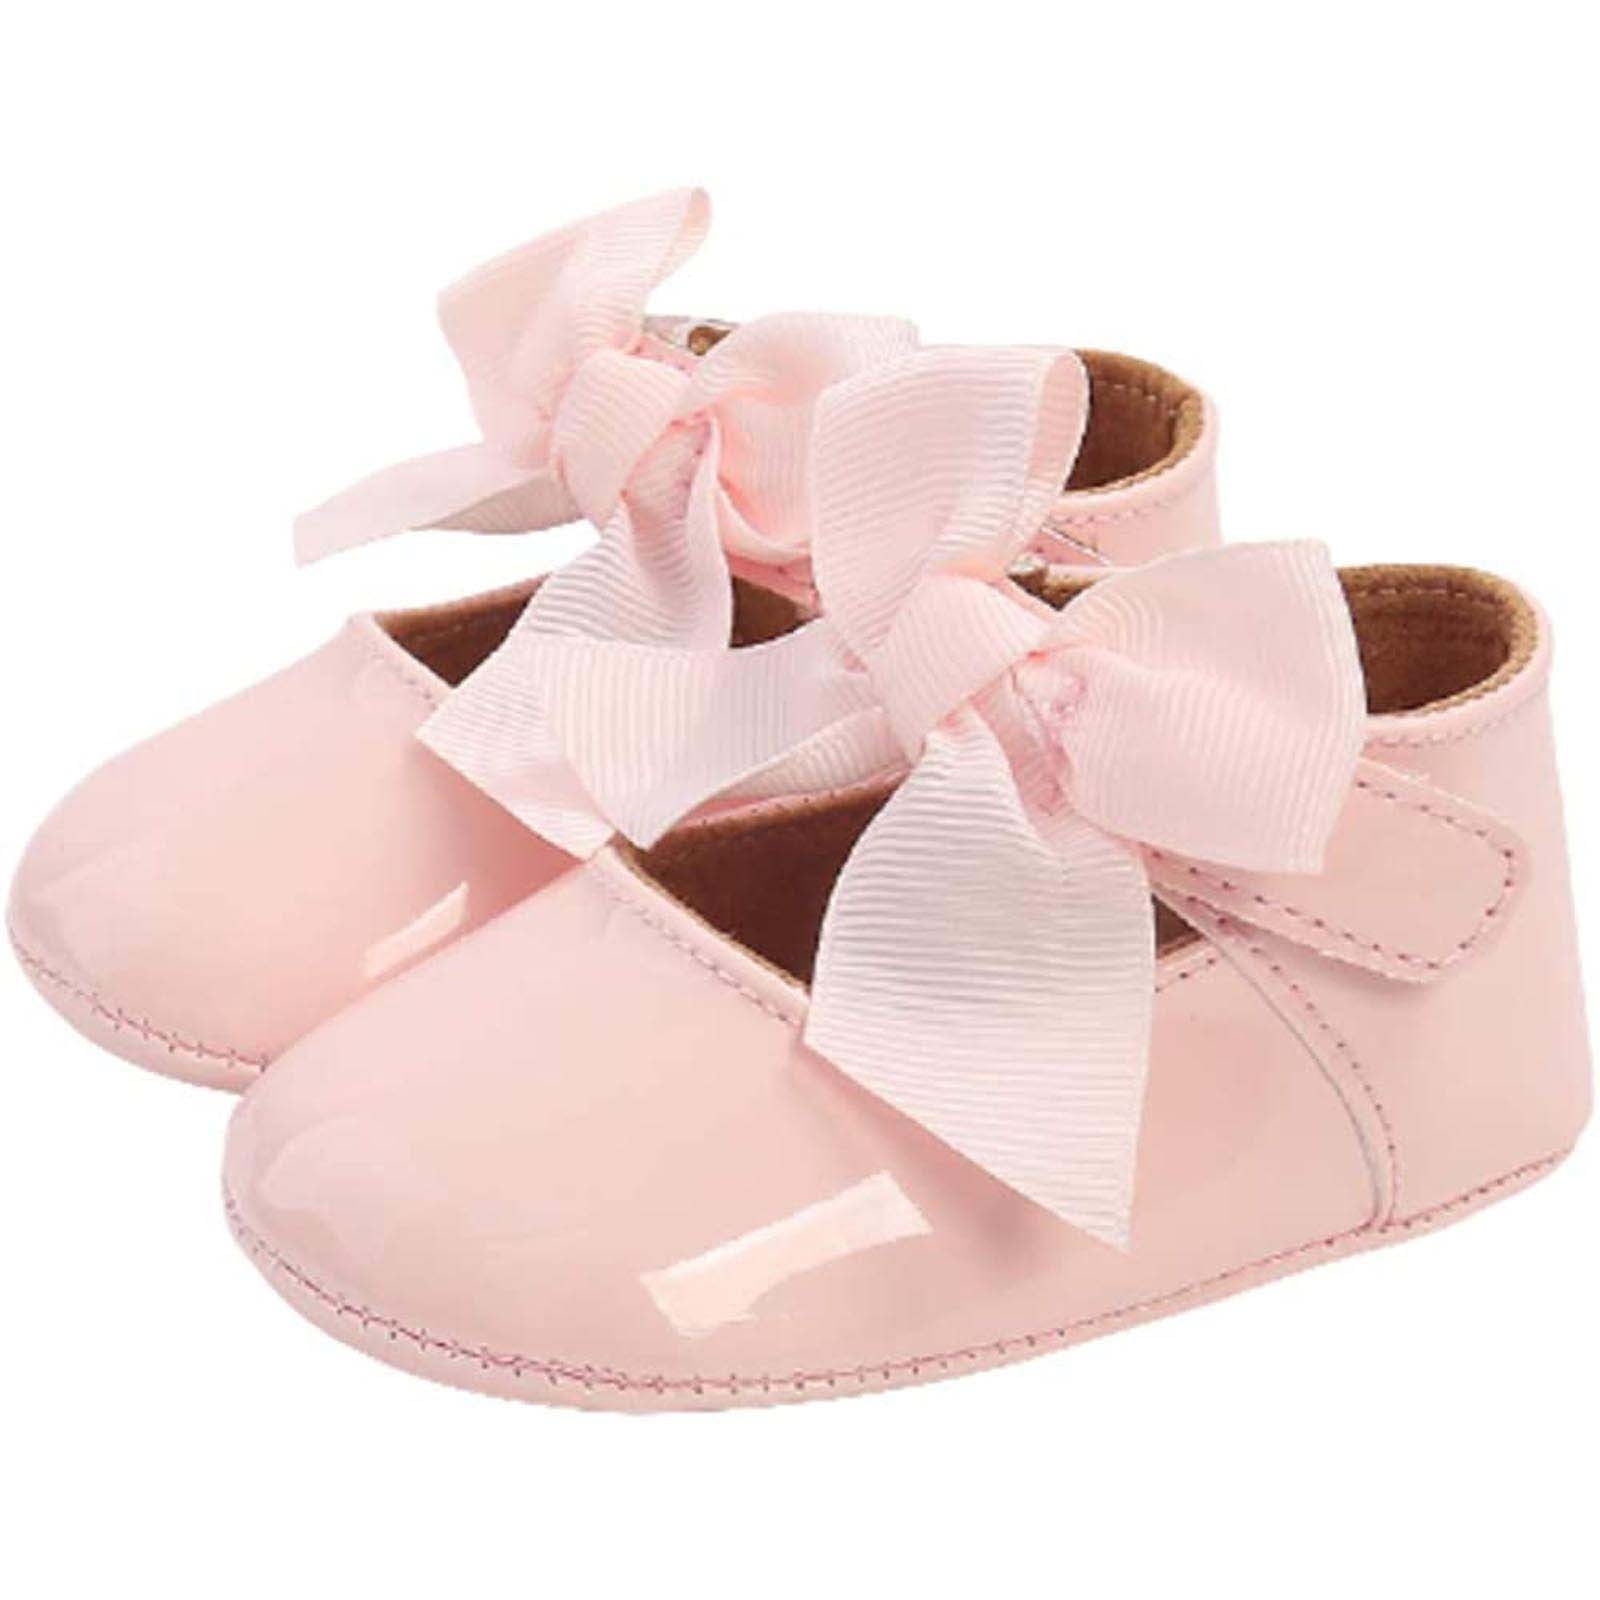 ENERCAKE Infant Baby Girls Shoes Non-Slip Bowknot Princess Dress Mary Jane Flats Toddler First Walker Baby Sneaker Shoes 